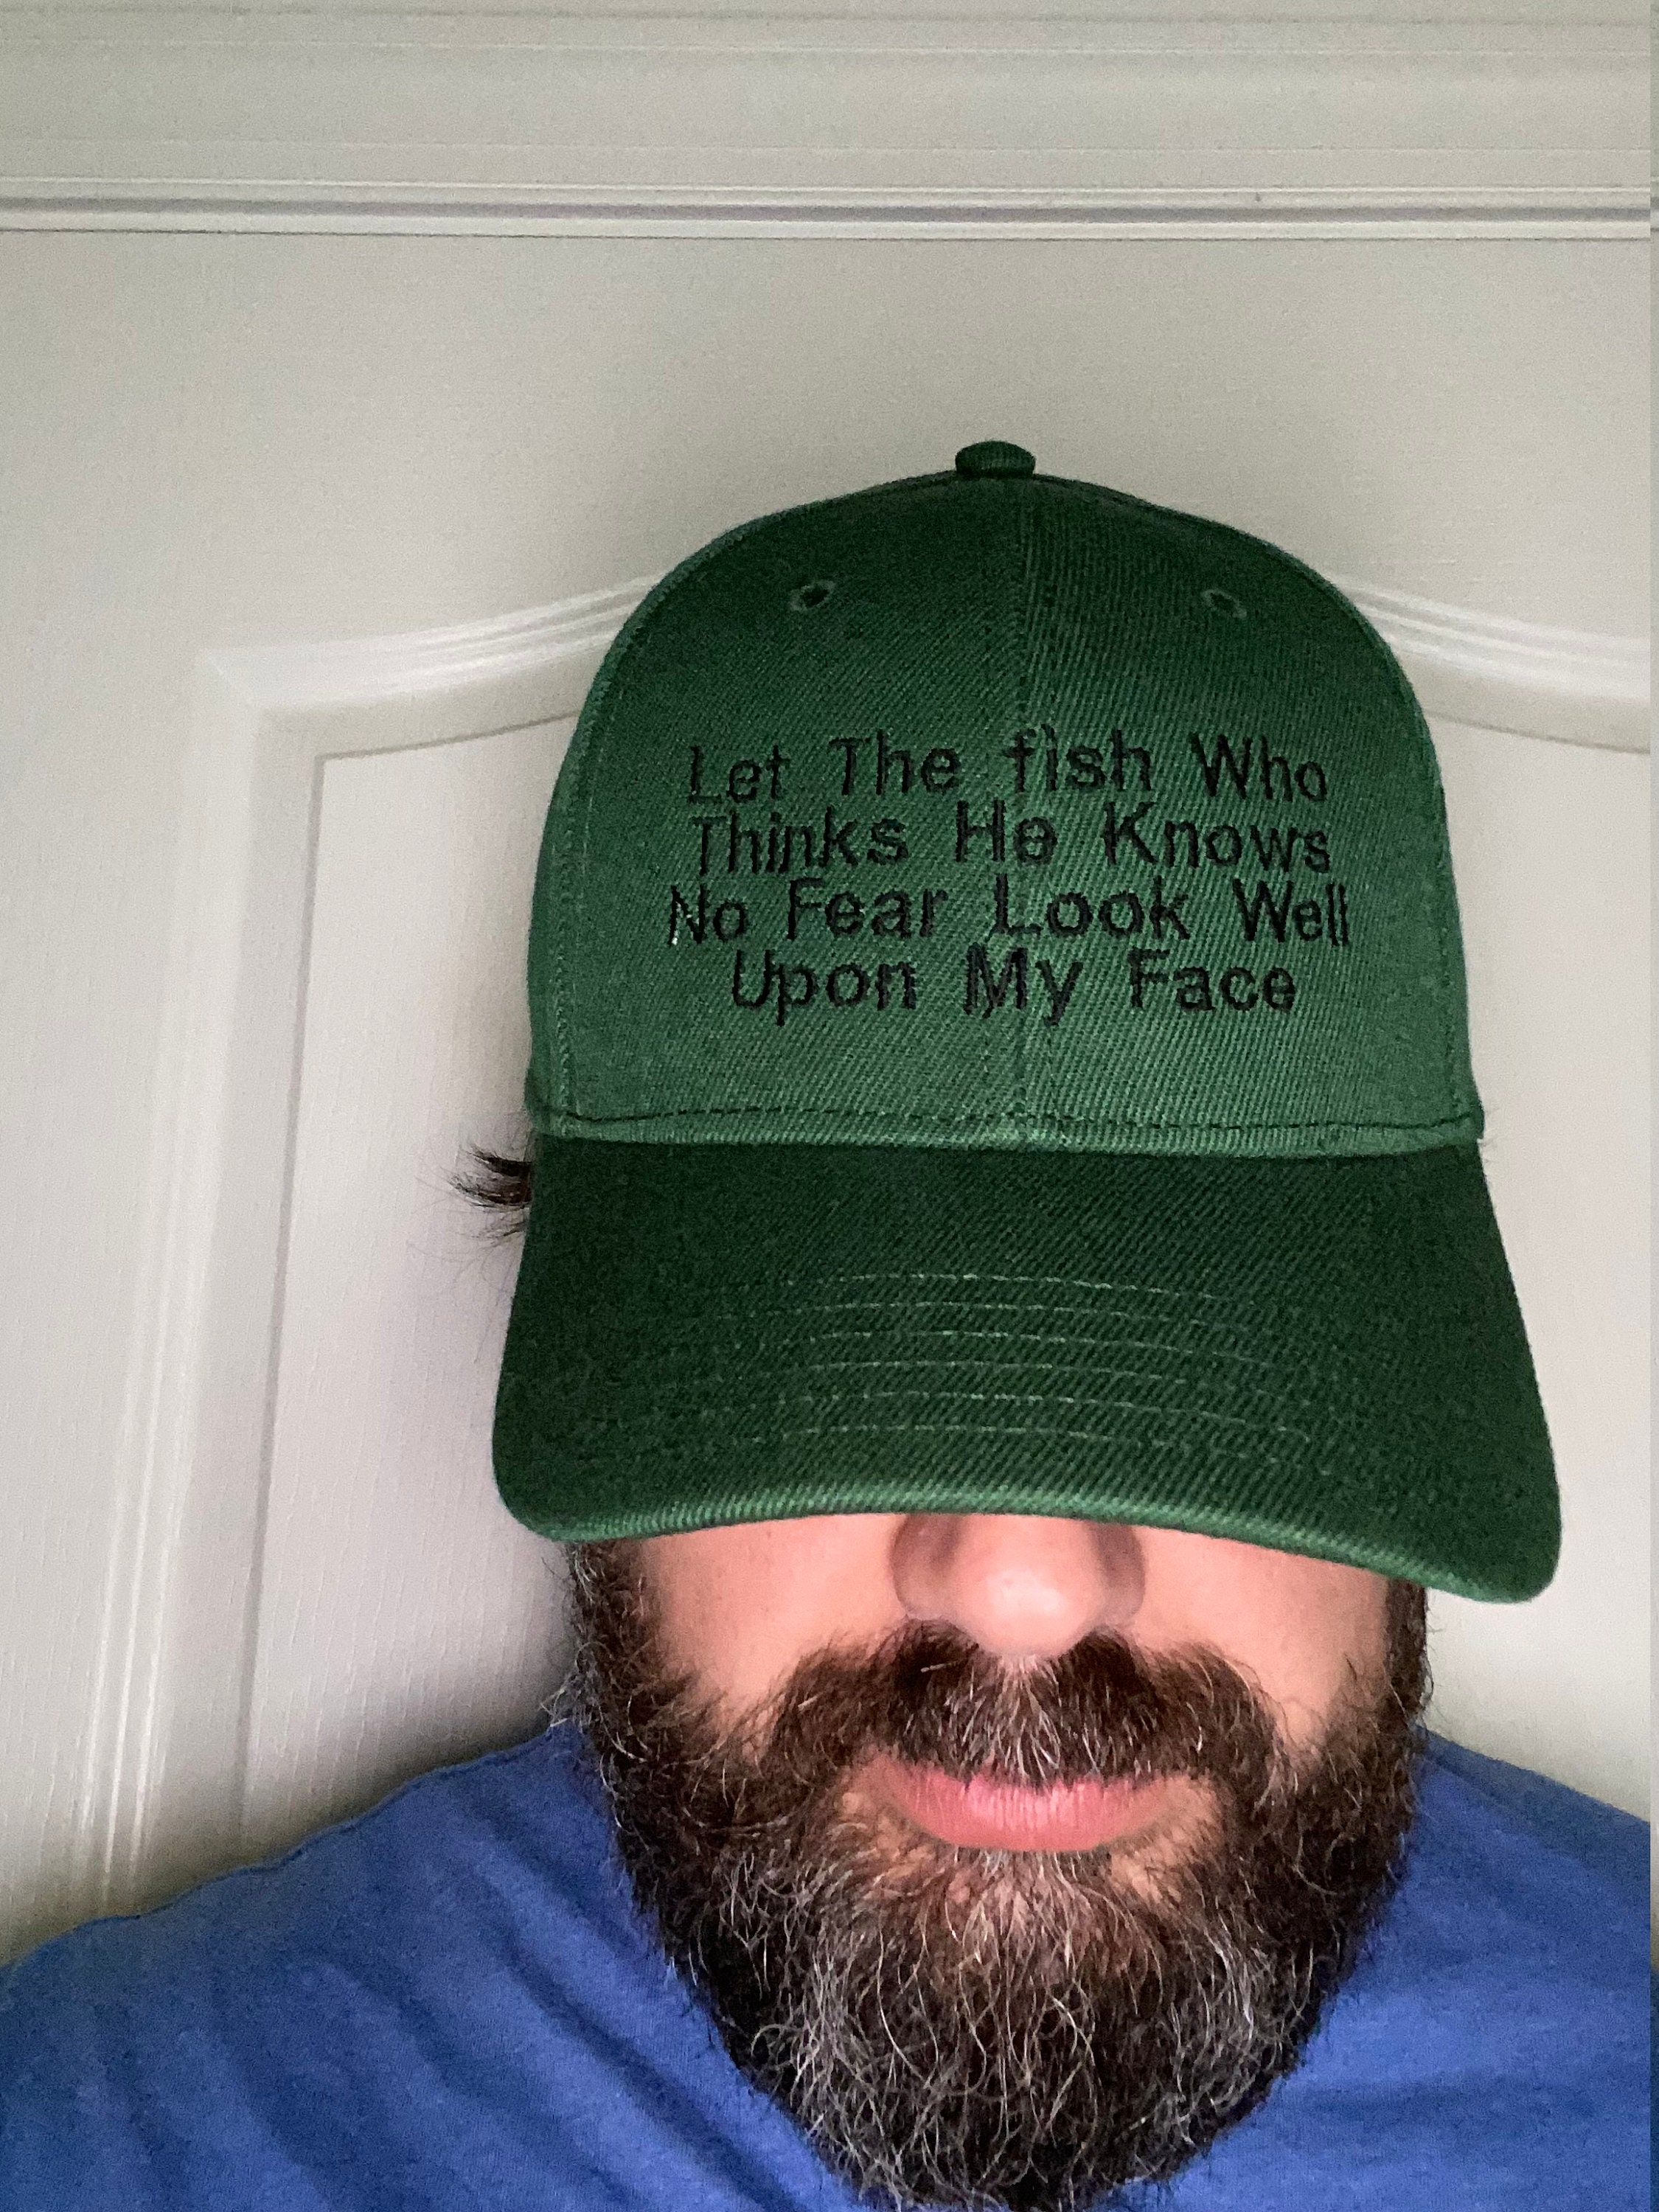 Dad Hat - Funny Fishing Hat - Let The Fish Who Thinks He Knows No Fear Look Well Upon My Face - Embroidered Gift